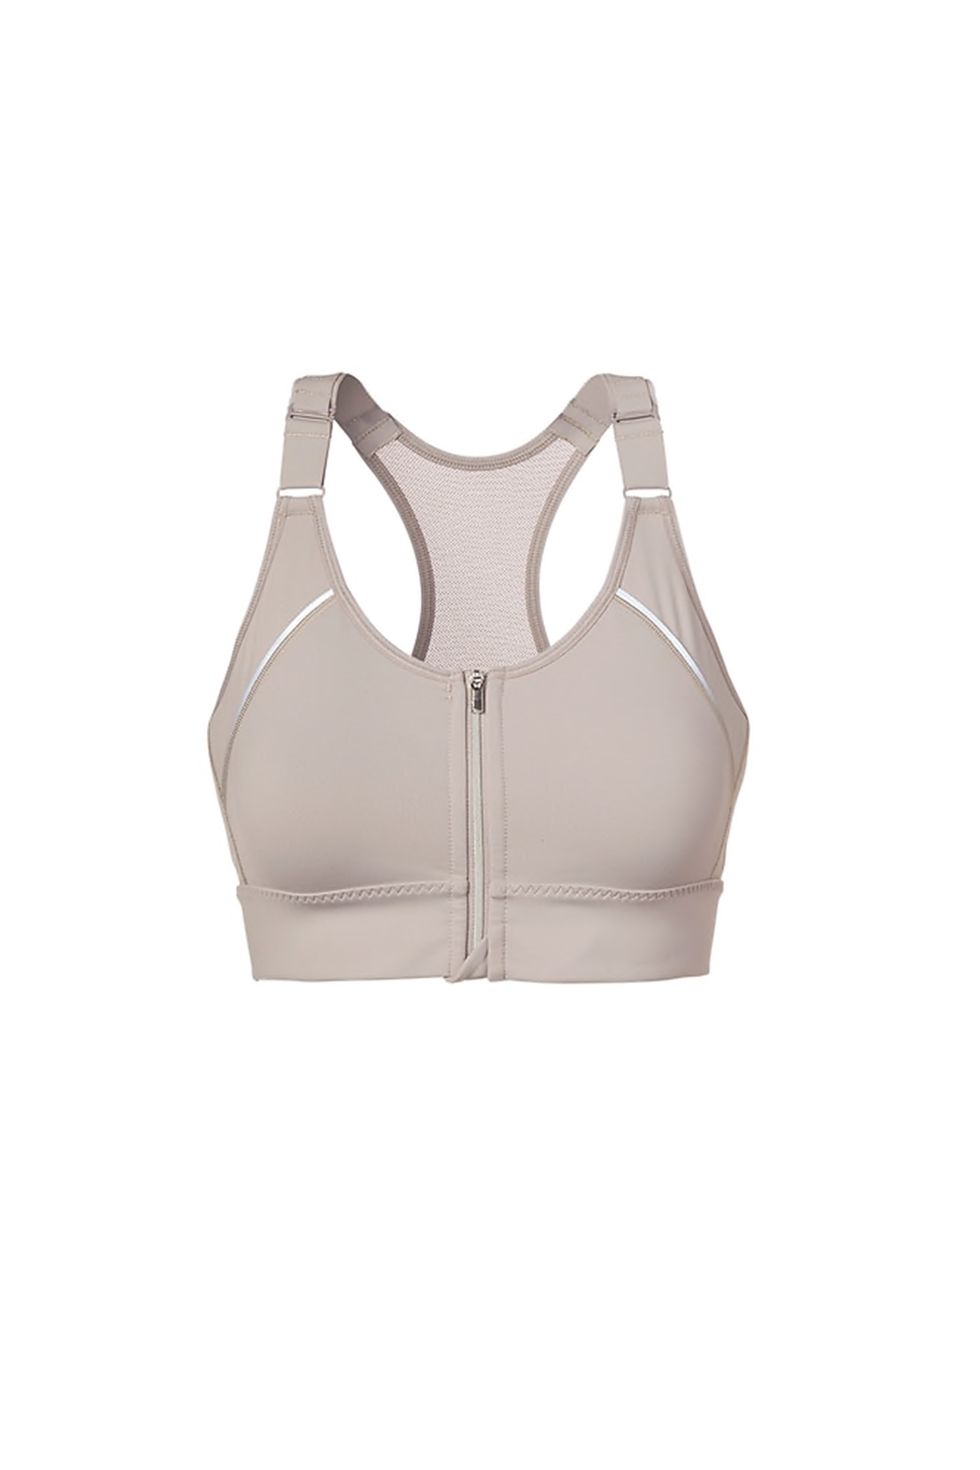 Athleta to Launch a Sports Bra Specifically for Breast Cancer Survivors